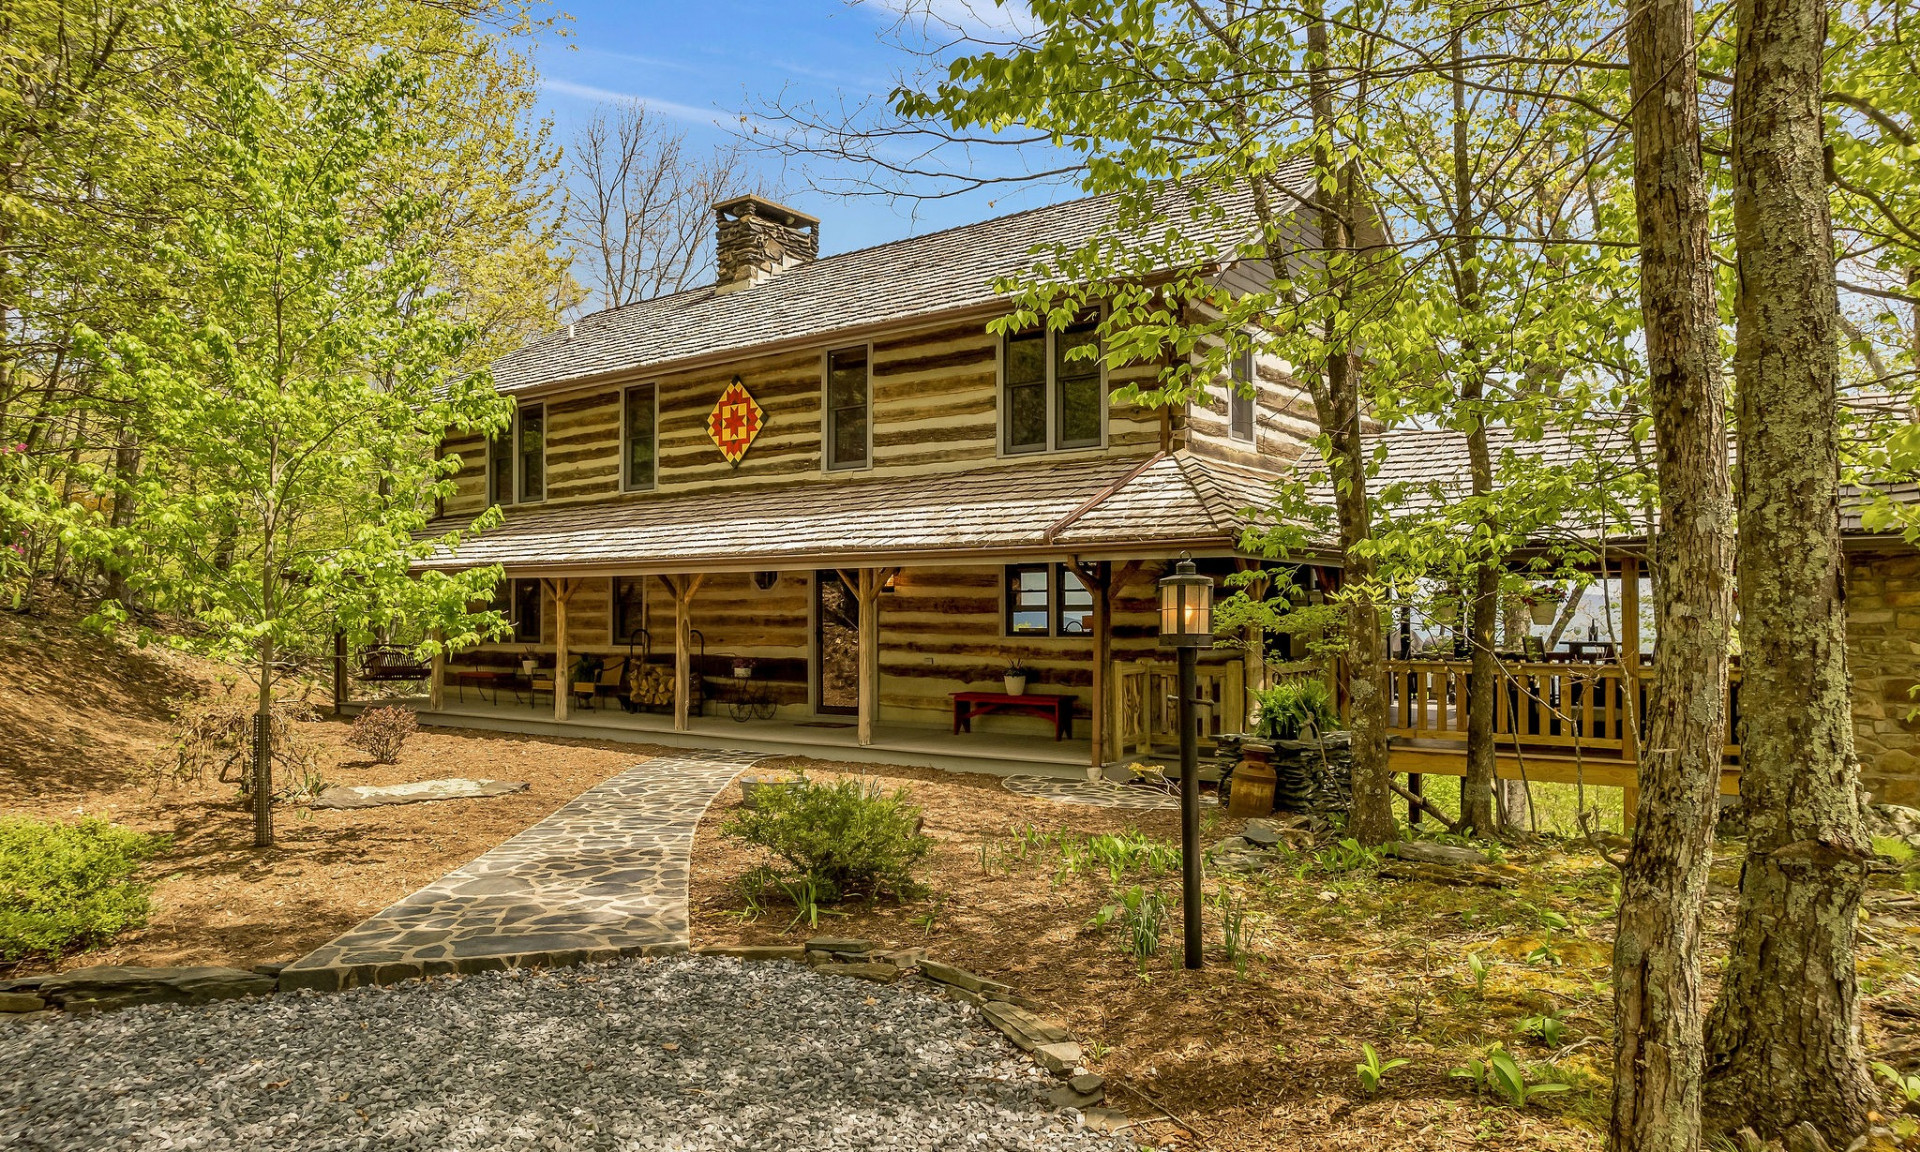 Come home to log cabin living in the established community of Stonebridge located in southern Ashe County.